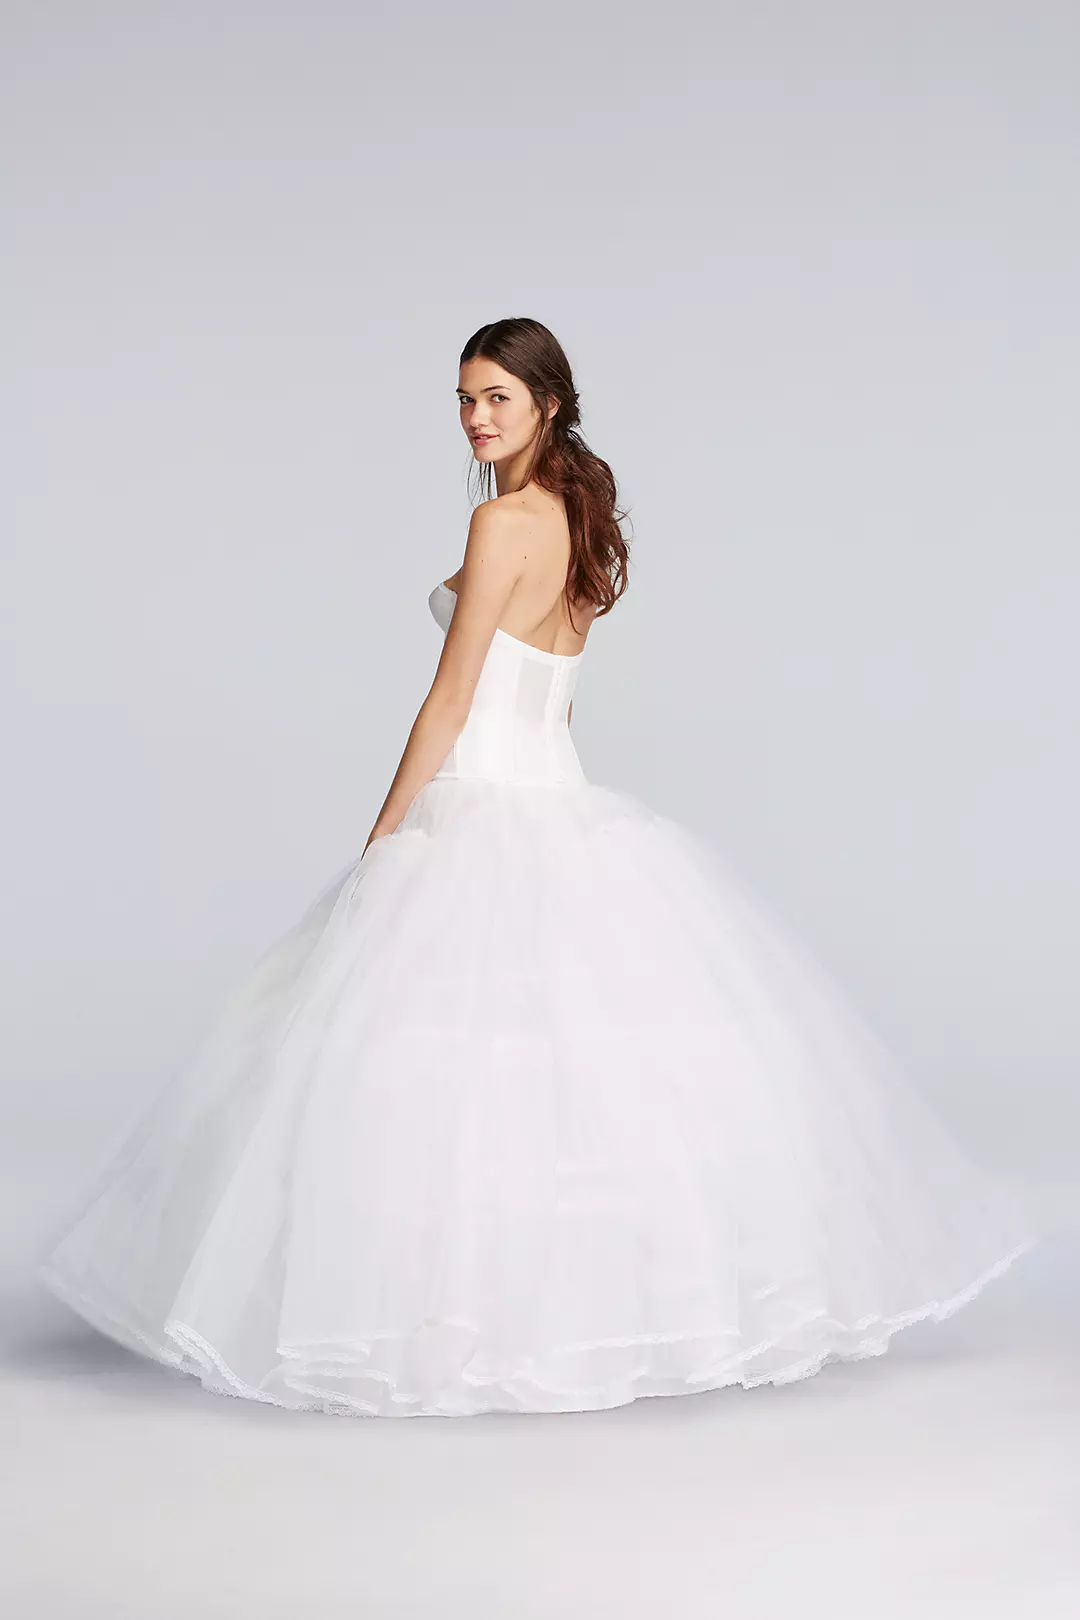 Extreme Ball Gown Hoop Slip